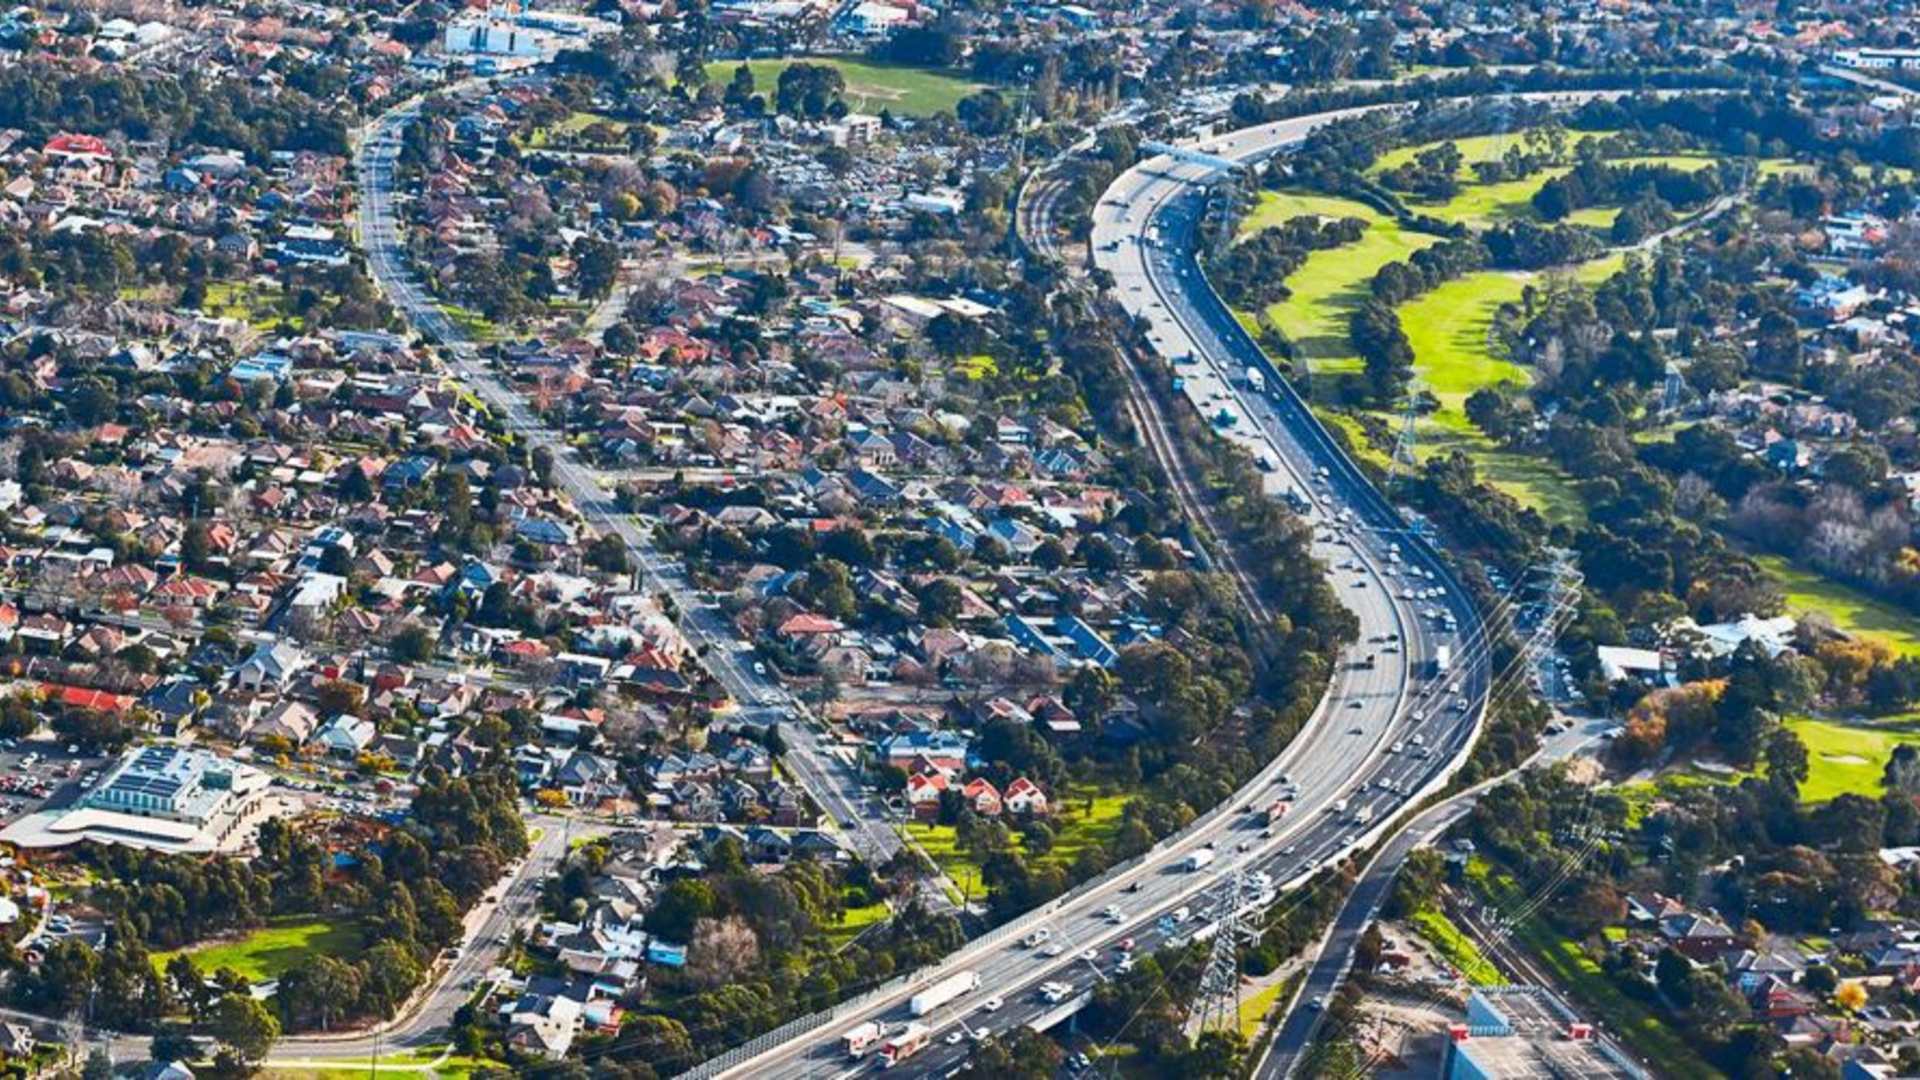 Aerial view of the Monash Freeway displaying the abundance in housing surrounding the freeway.